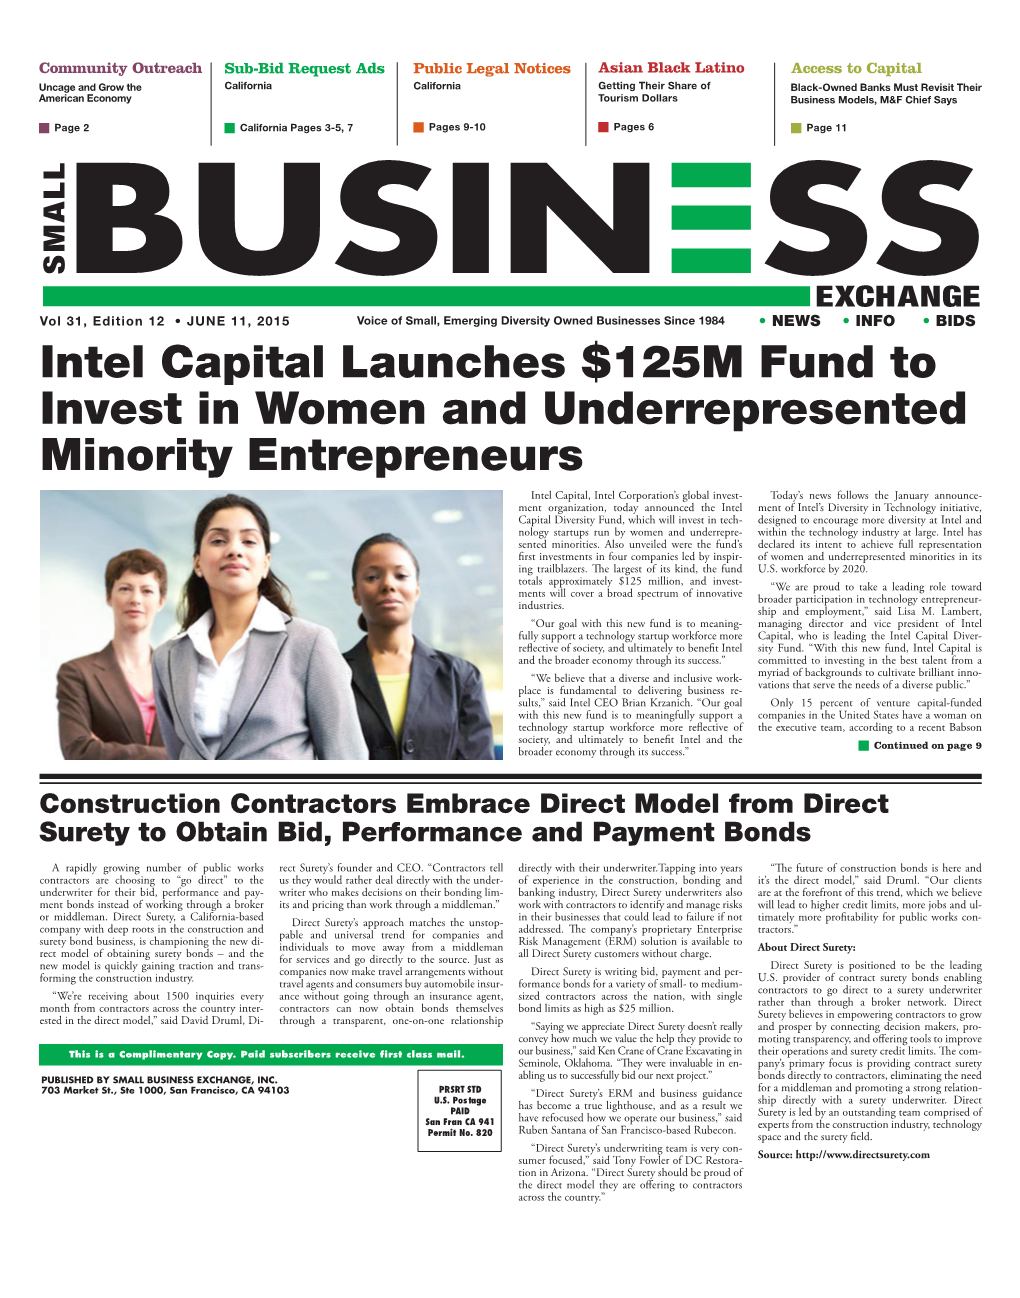 Intel Capital Launches $125M Fund to Invest in Women And